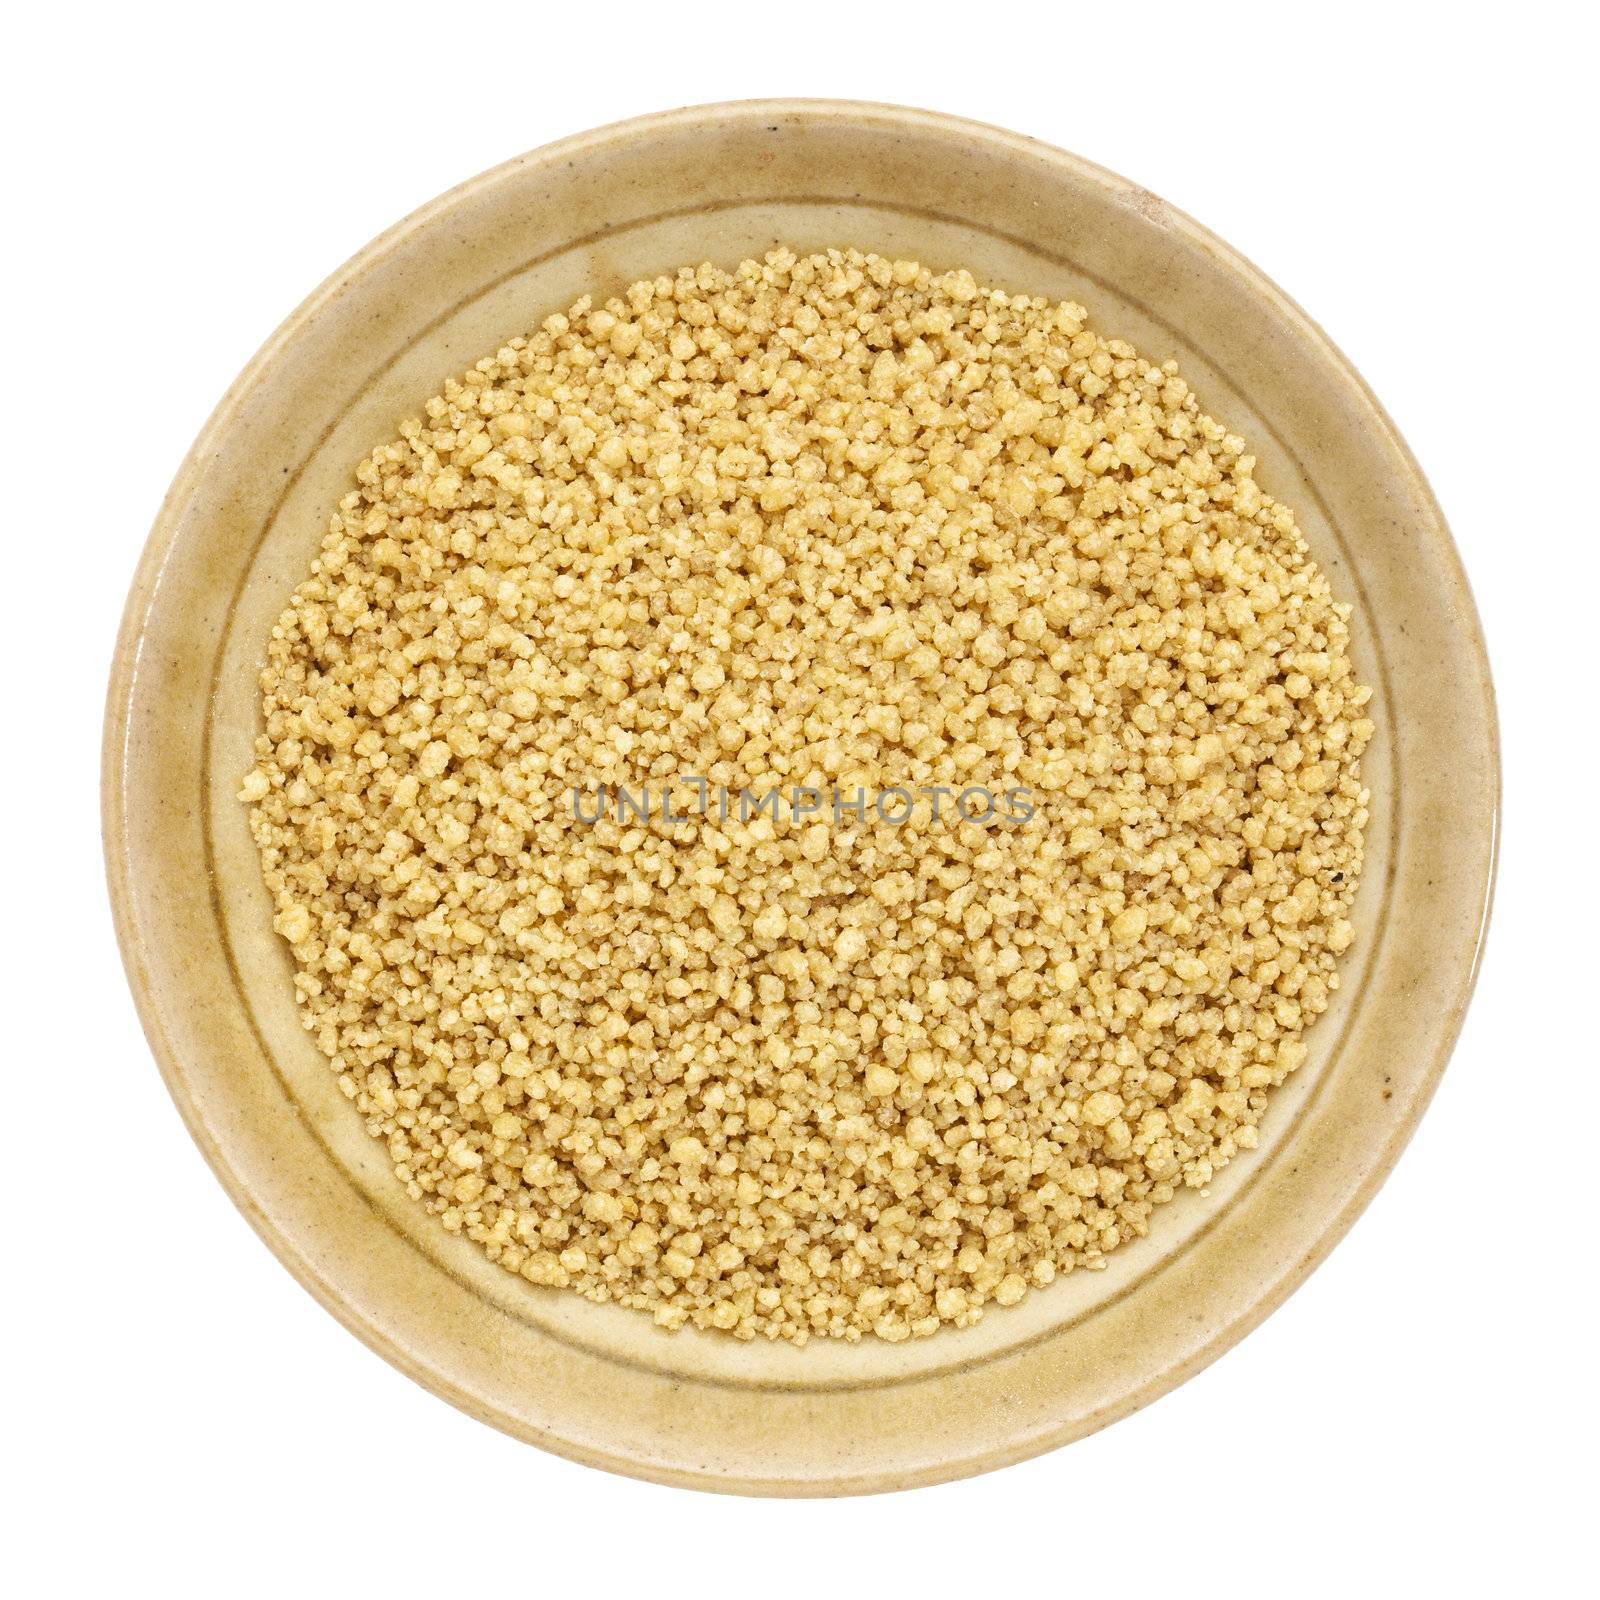 whole wheat couscous in a small ceramic bowl isolated on white, top view